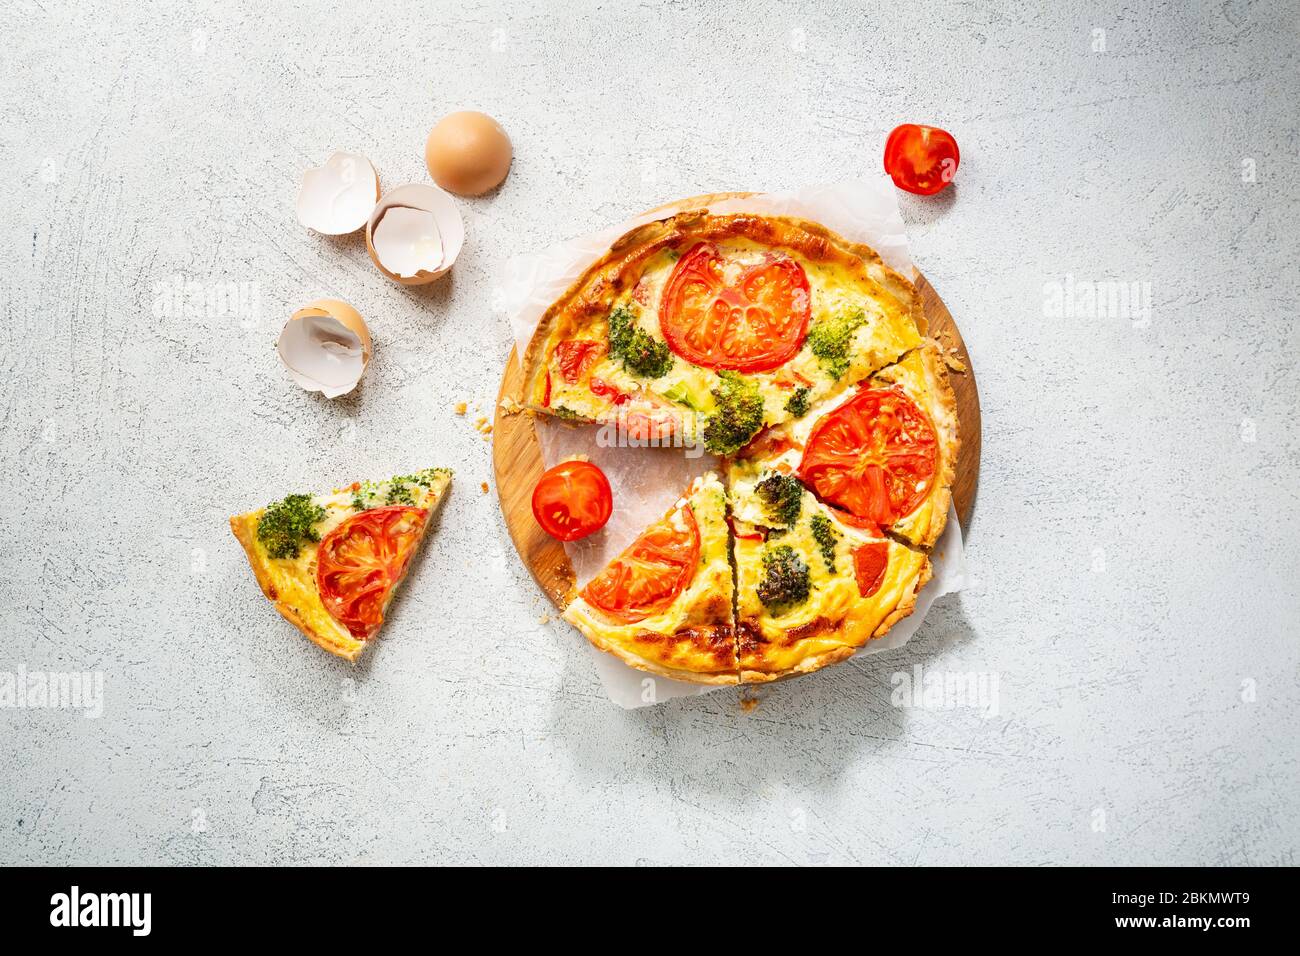 Overhead view of Quiche lorraine with broccoli and cheese Stock Photo